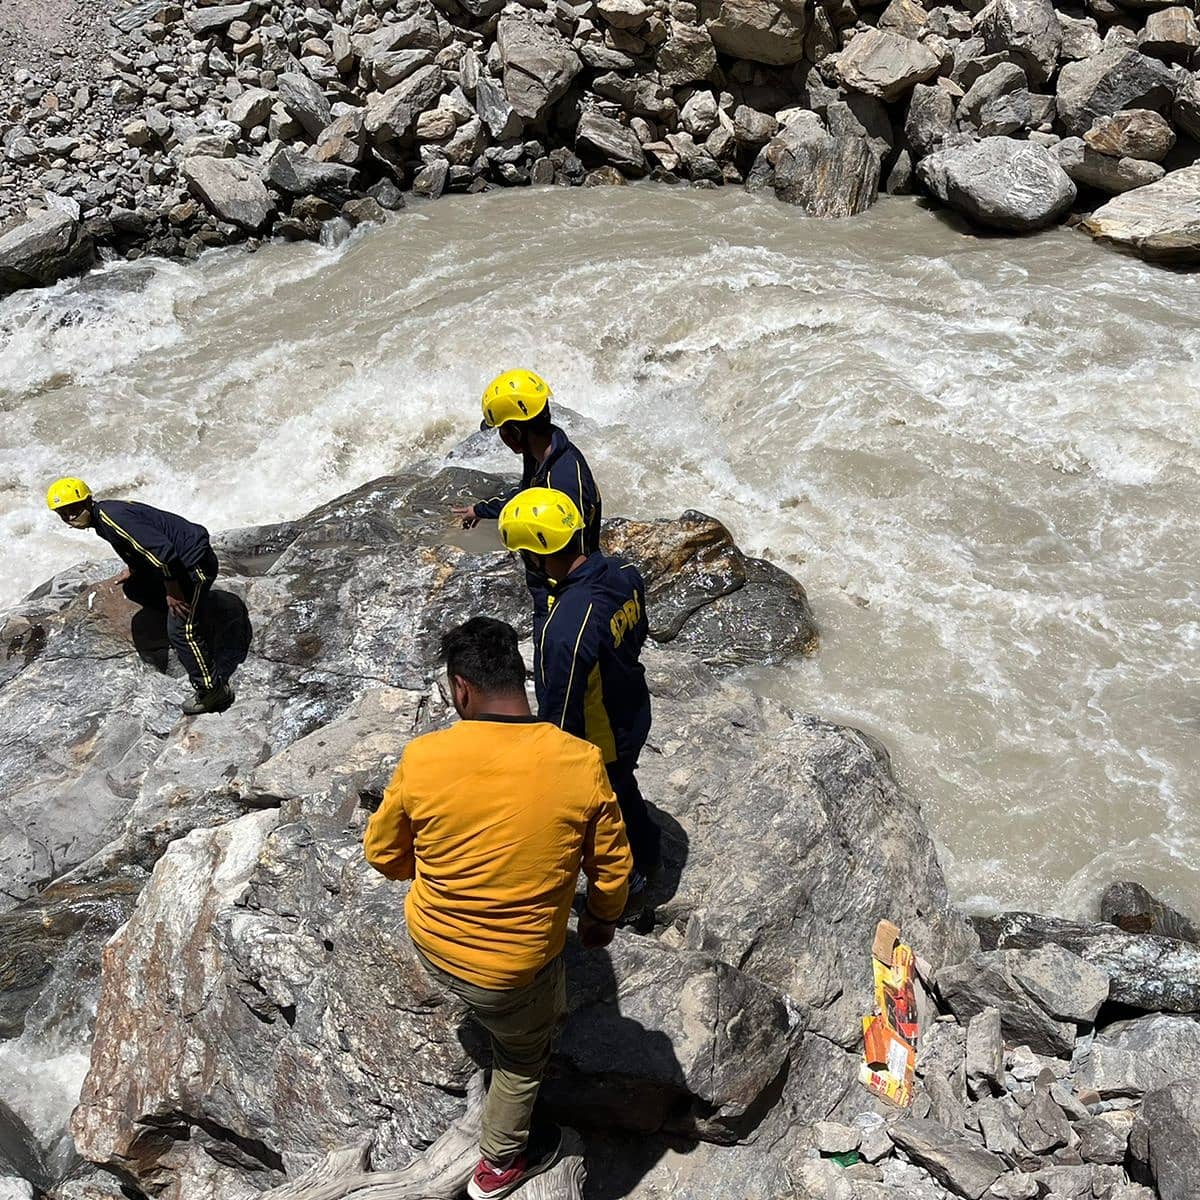 The number of dead bodies found in the rivers of Uttarakhand increases during the monsoon season